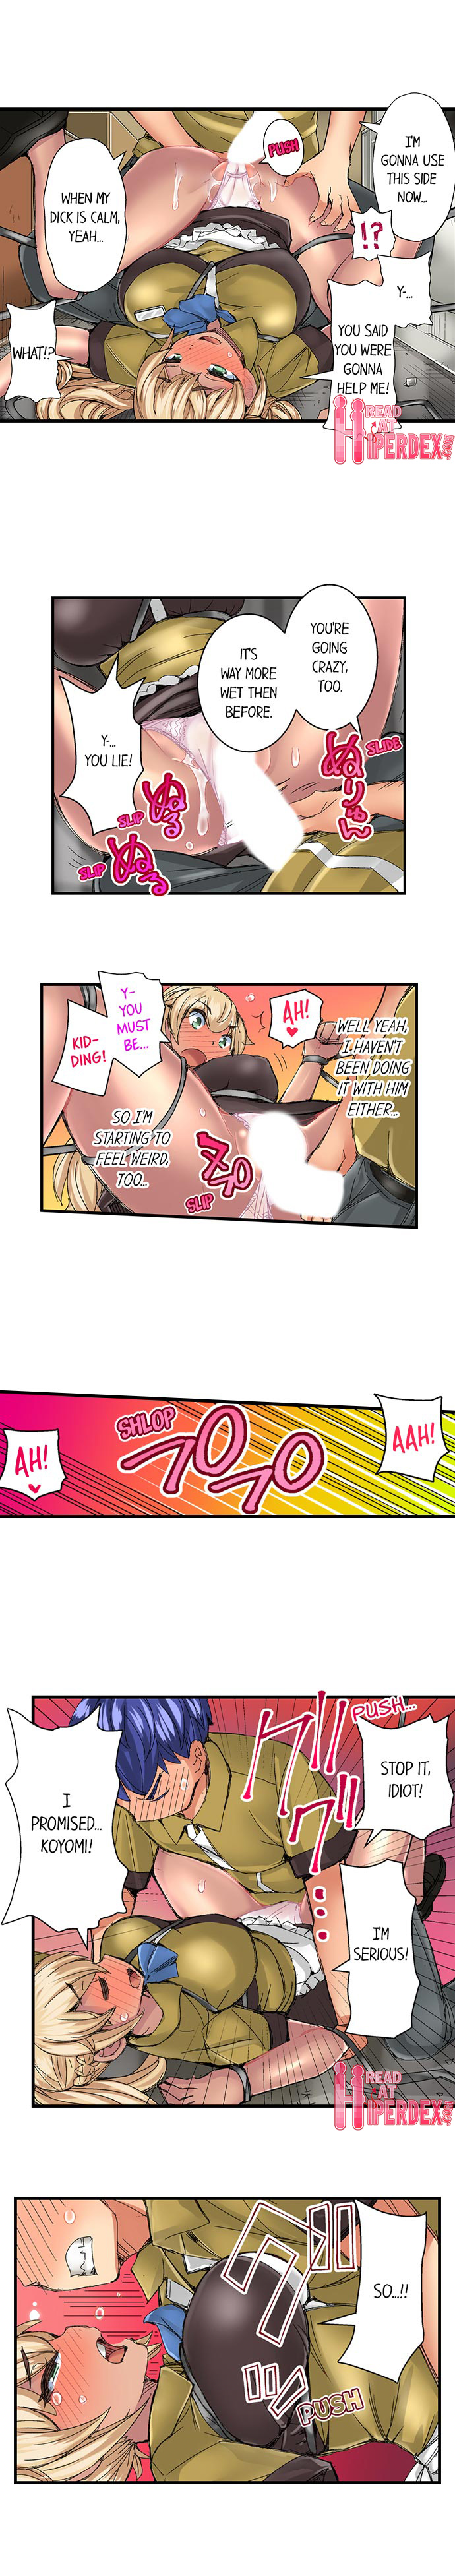 Taking a Hot Tanned Chick’s Virginity - Chapter 36 Page 5